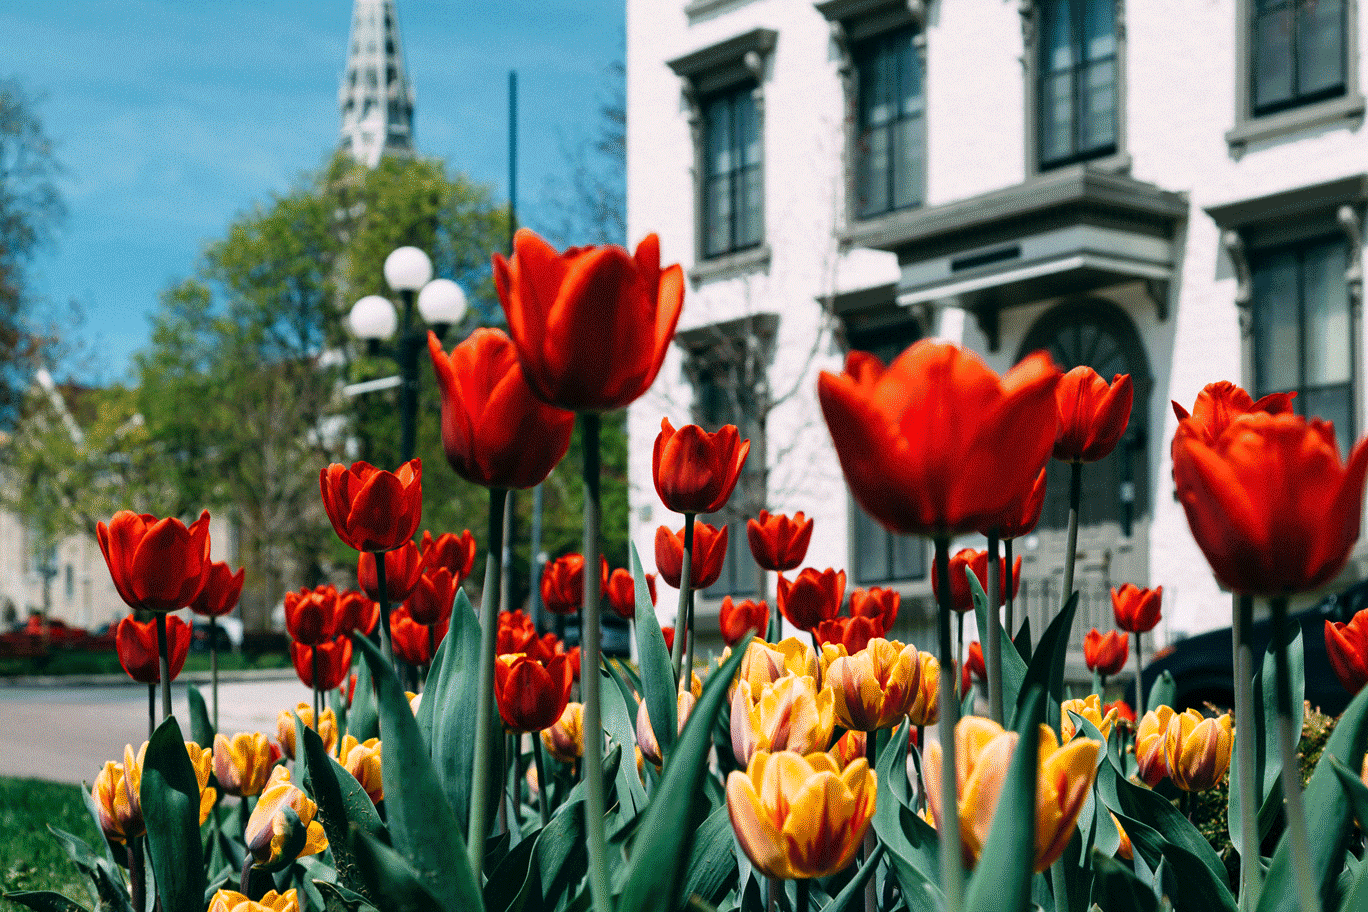 Tulips pictured on courthouse avenue